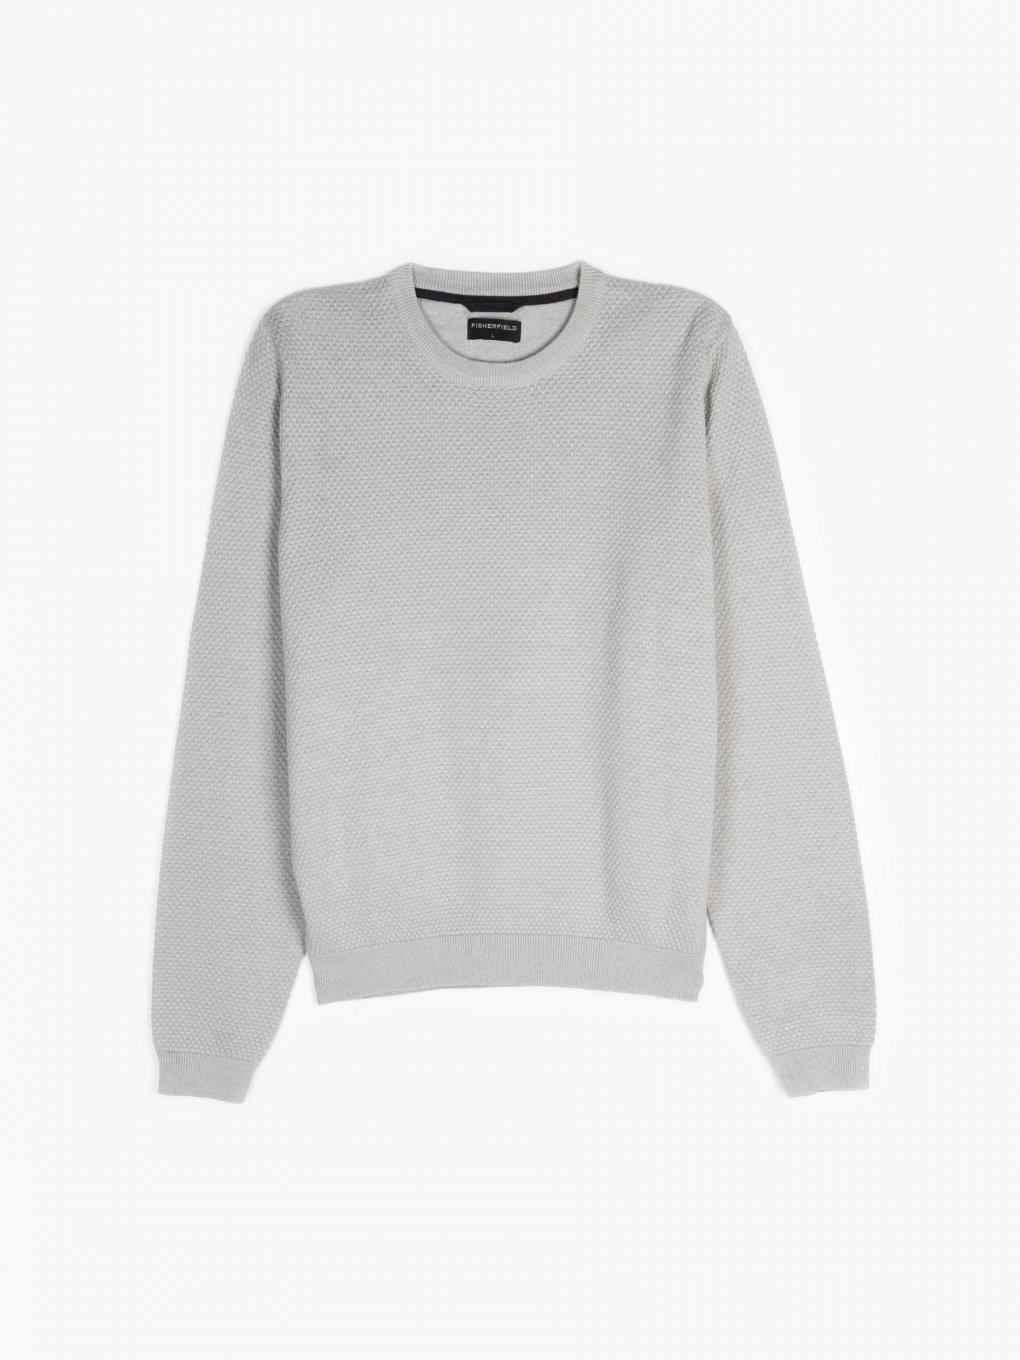 Structured pullover